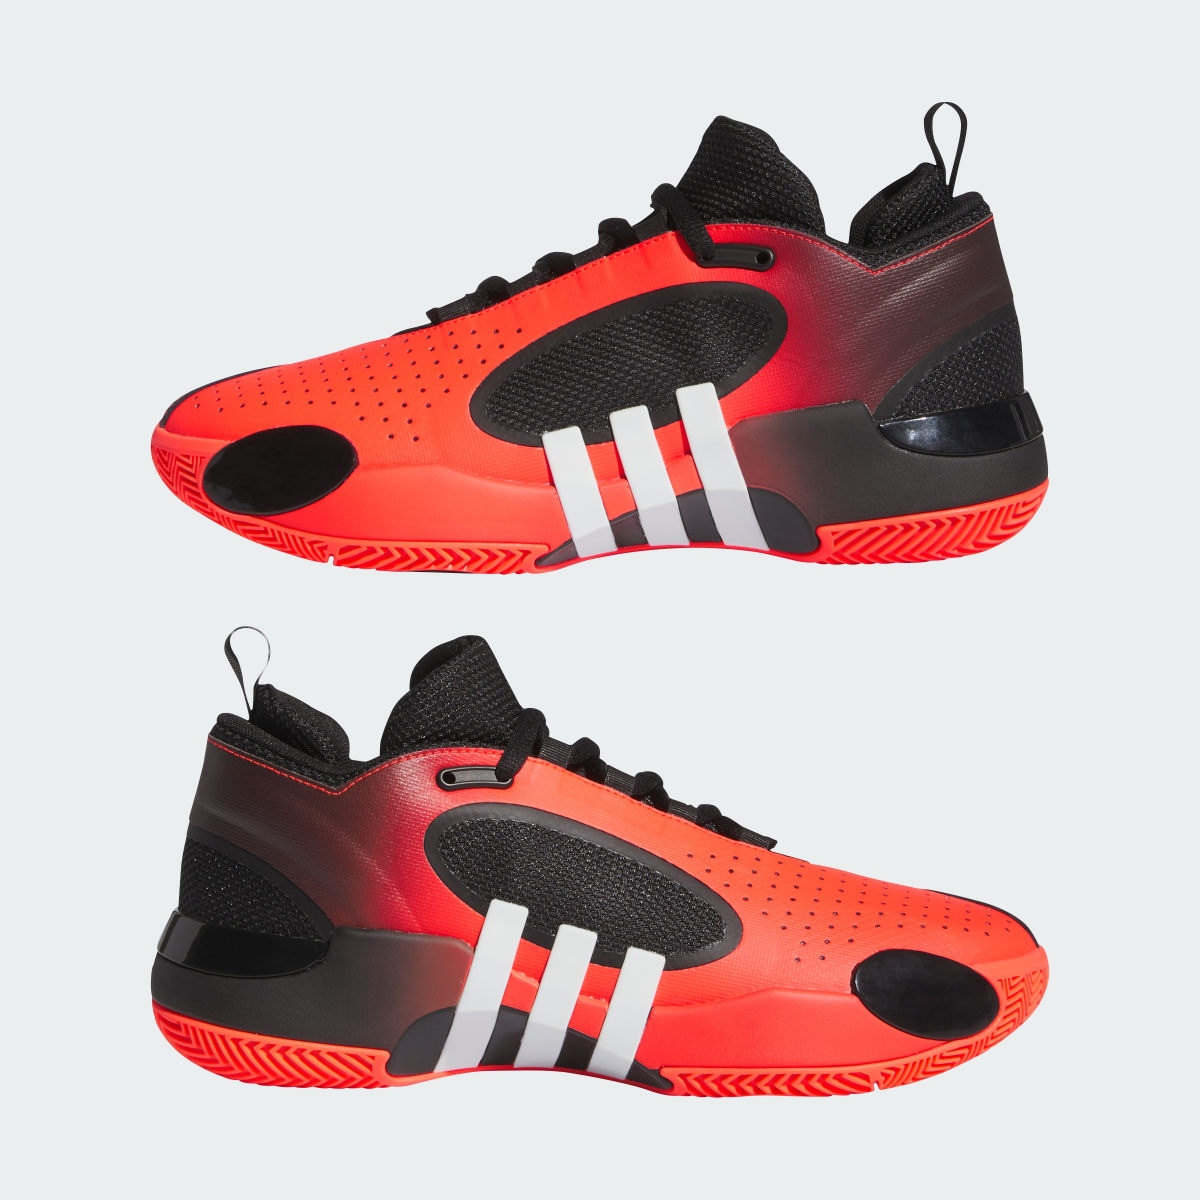 Adidas D.O.N Issue 5 Basketball Shoes. 8